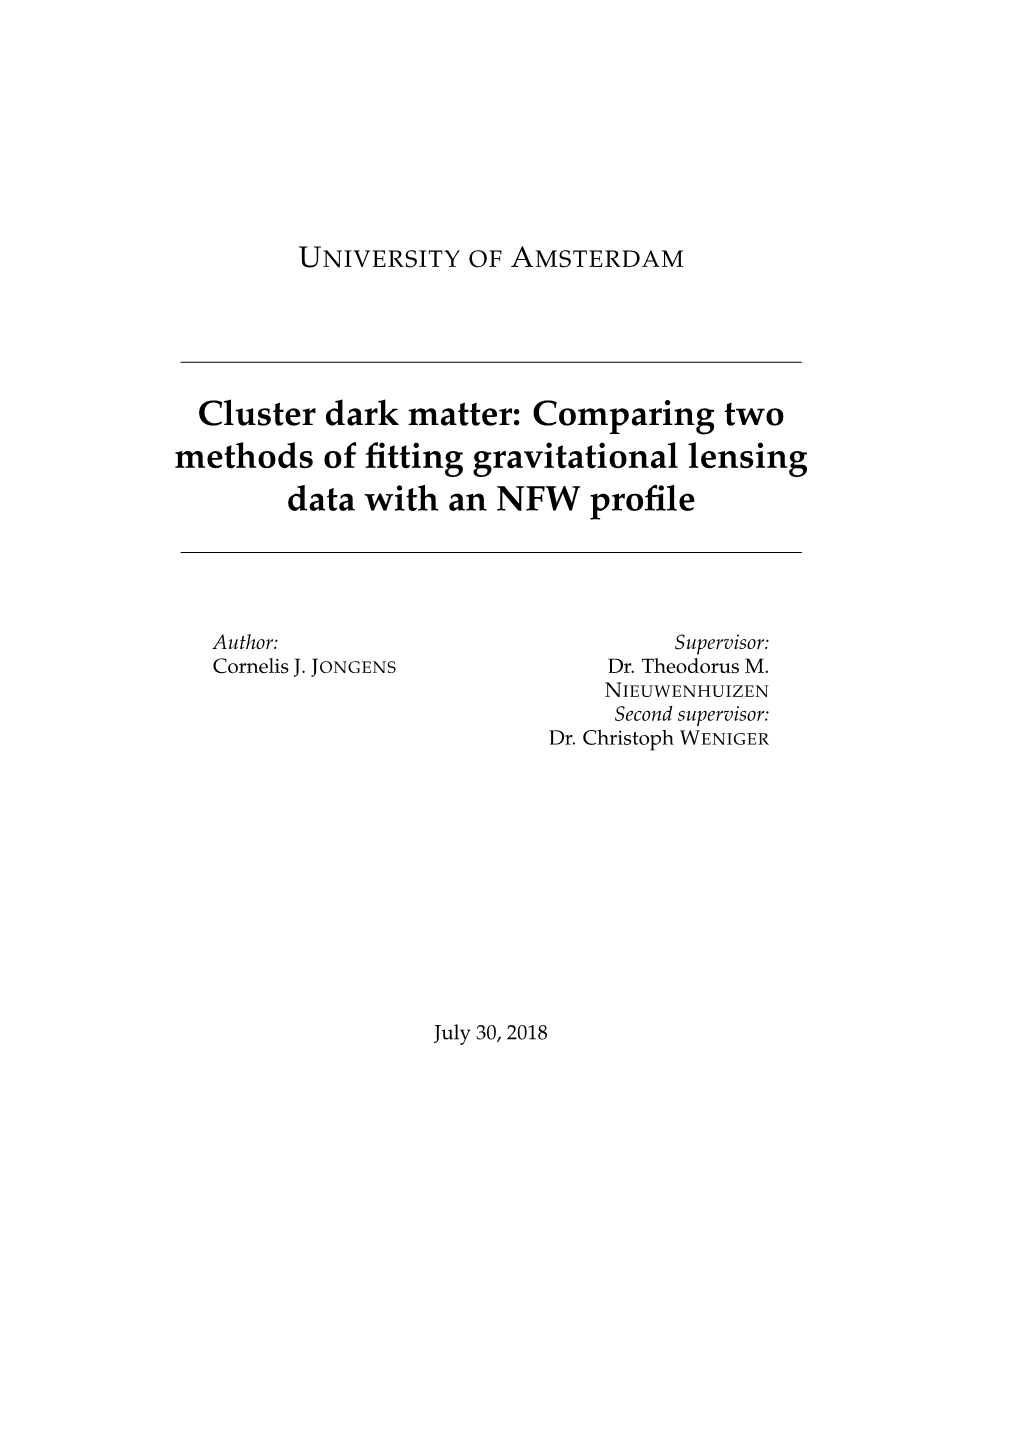 Cluster Dark Matter: Comparing Two Methods of ﬁtting Gravitational Lensing Data with an NFW Proﬁle